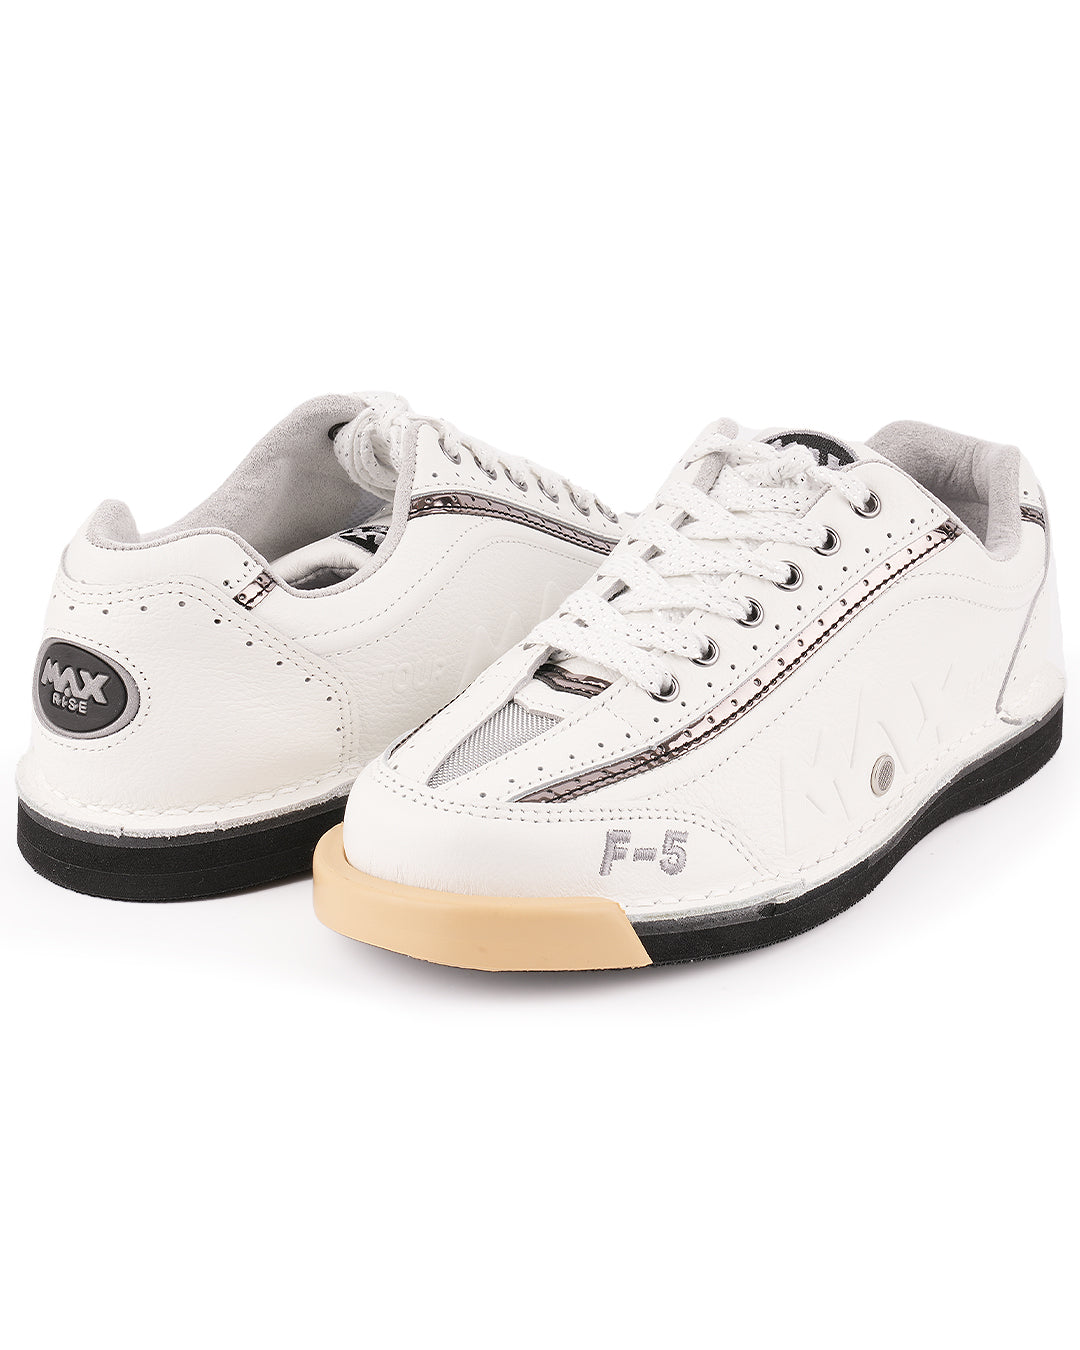 maxwelter f-5 tour bowling shoes white leather both